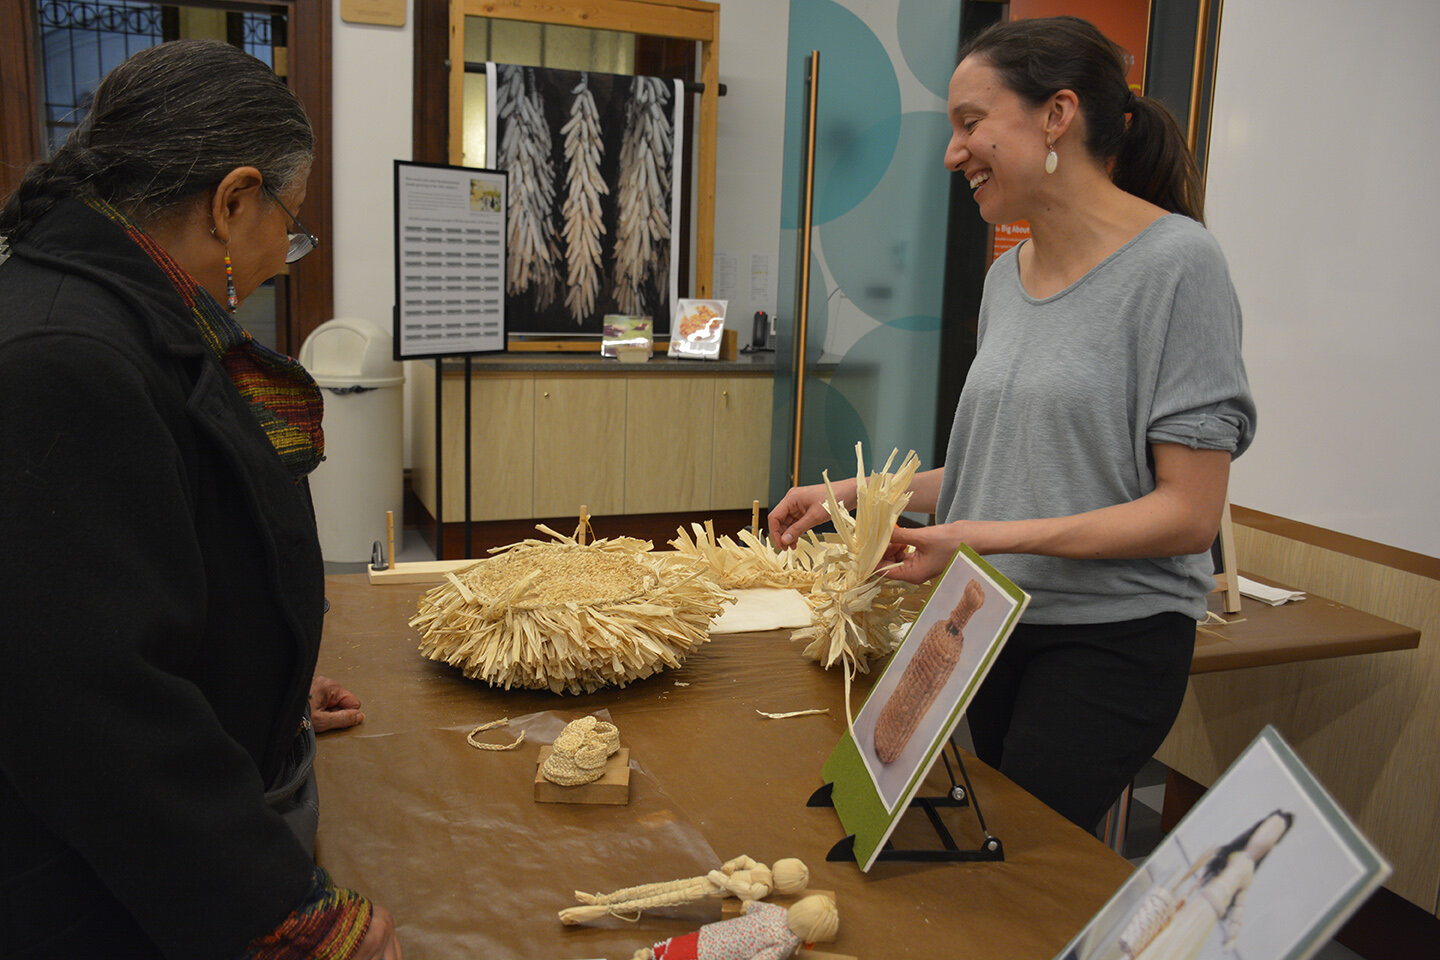  Public program about Oneö:gën (Iroquois White Corn) at the National Museum of the American Indian 